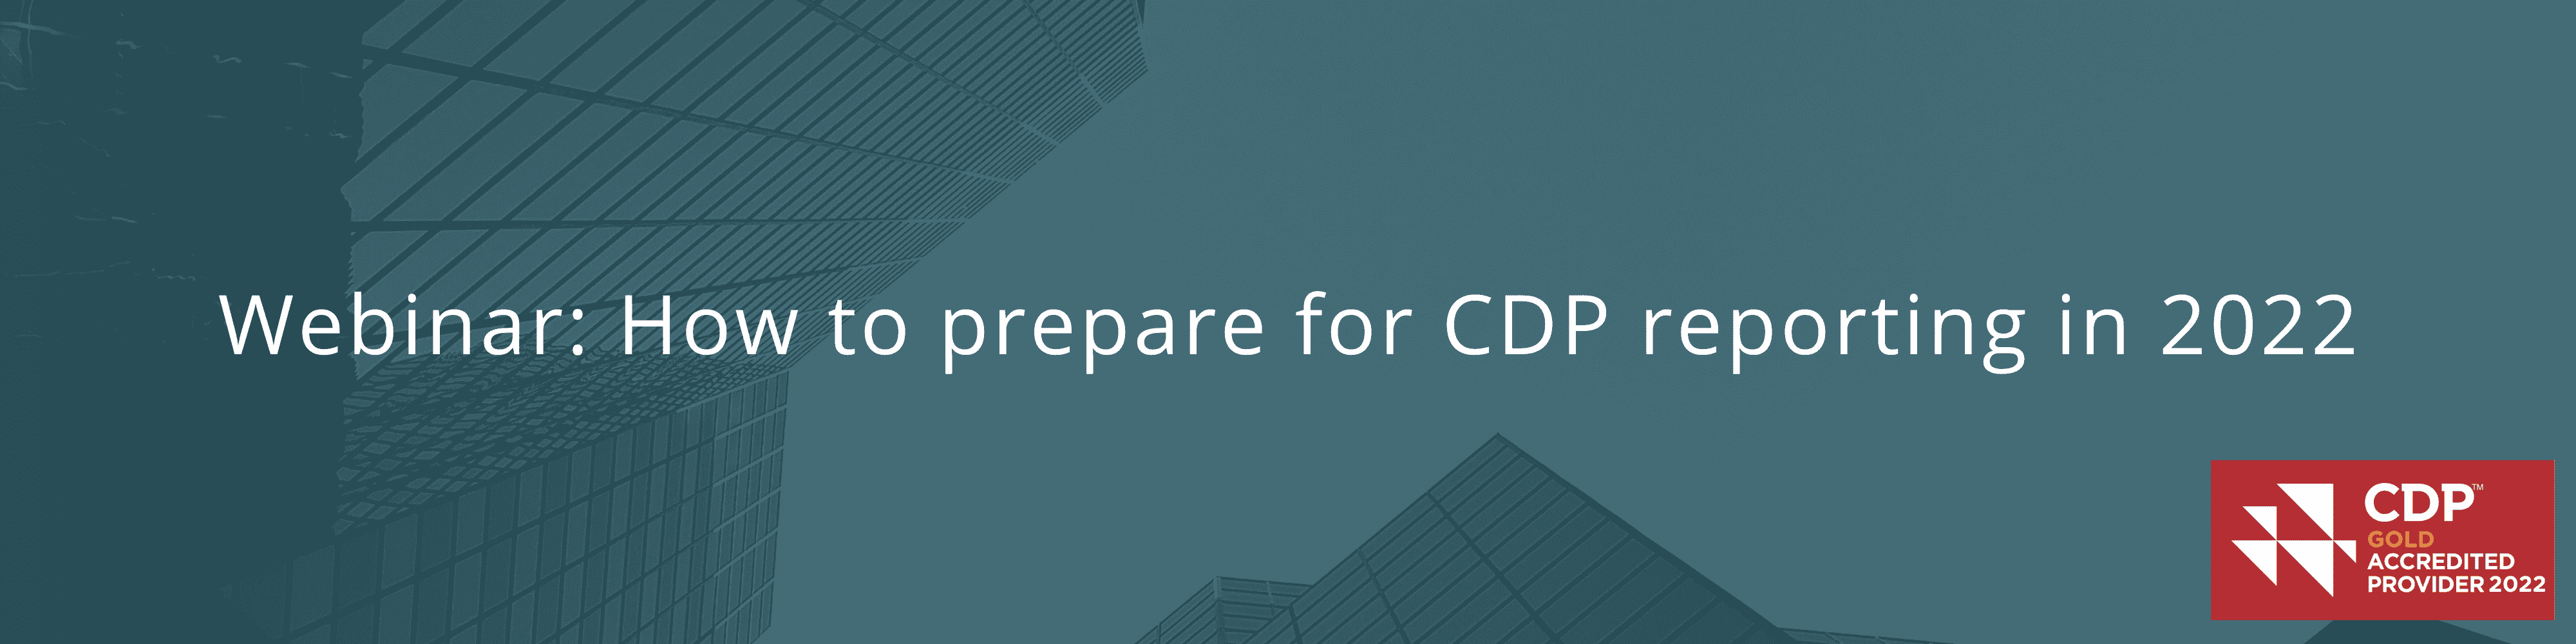 How to prepare for CDP reporting in 2022